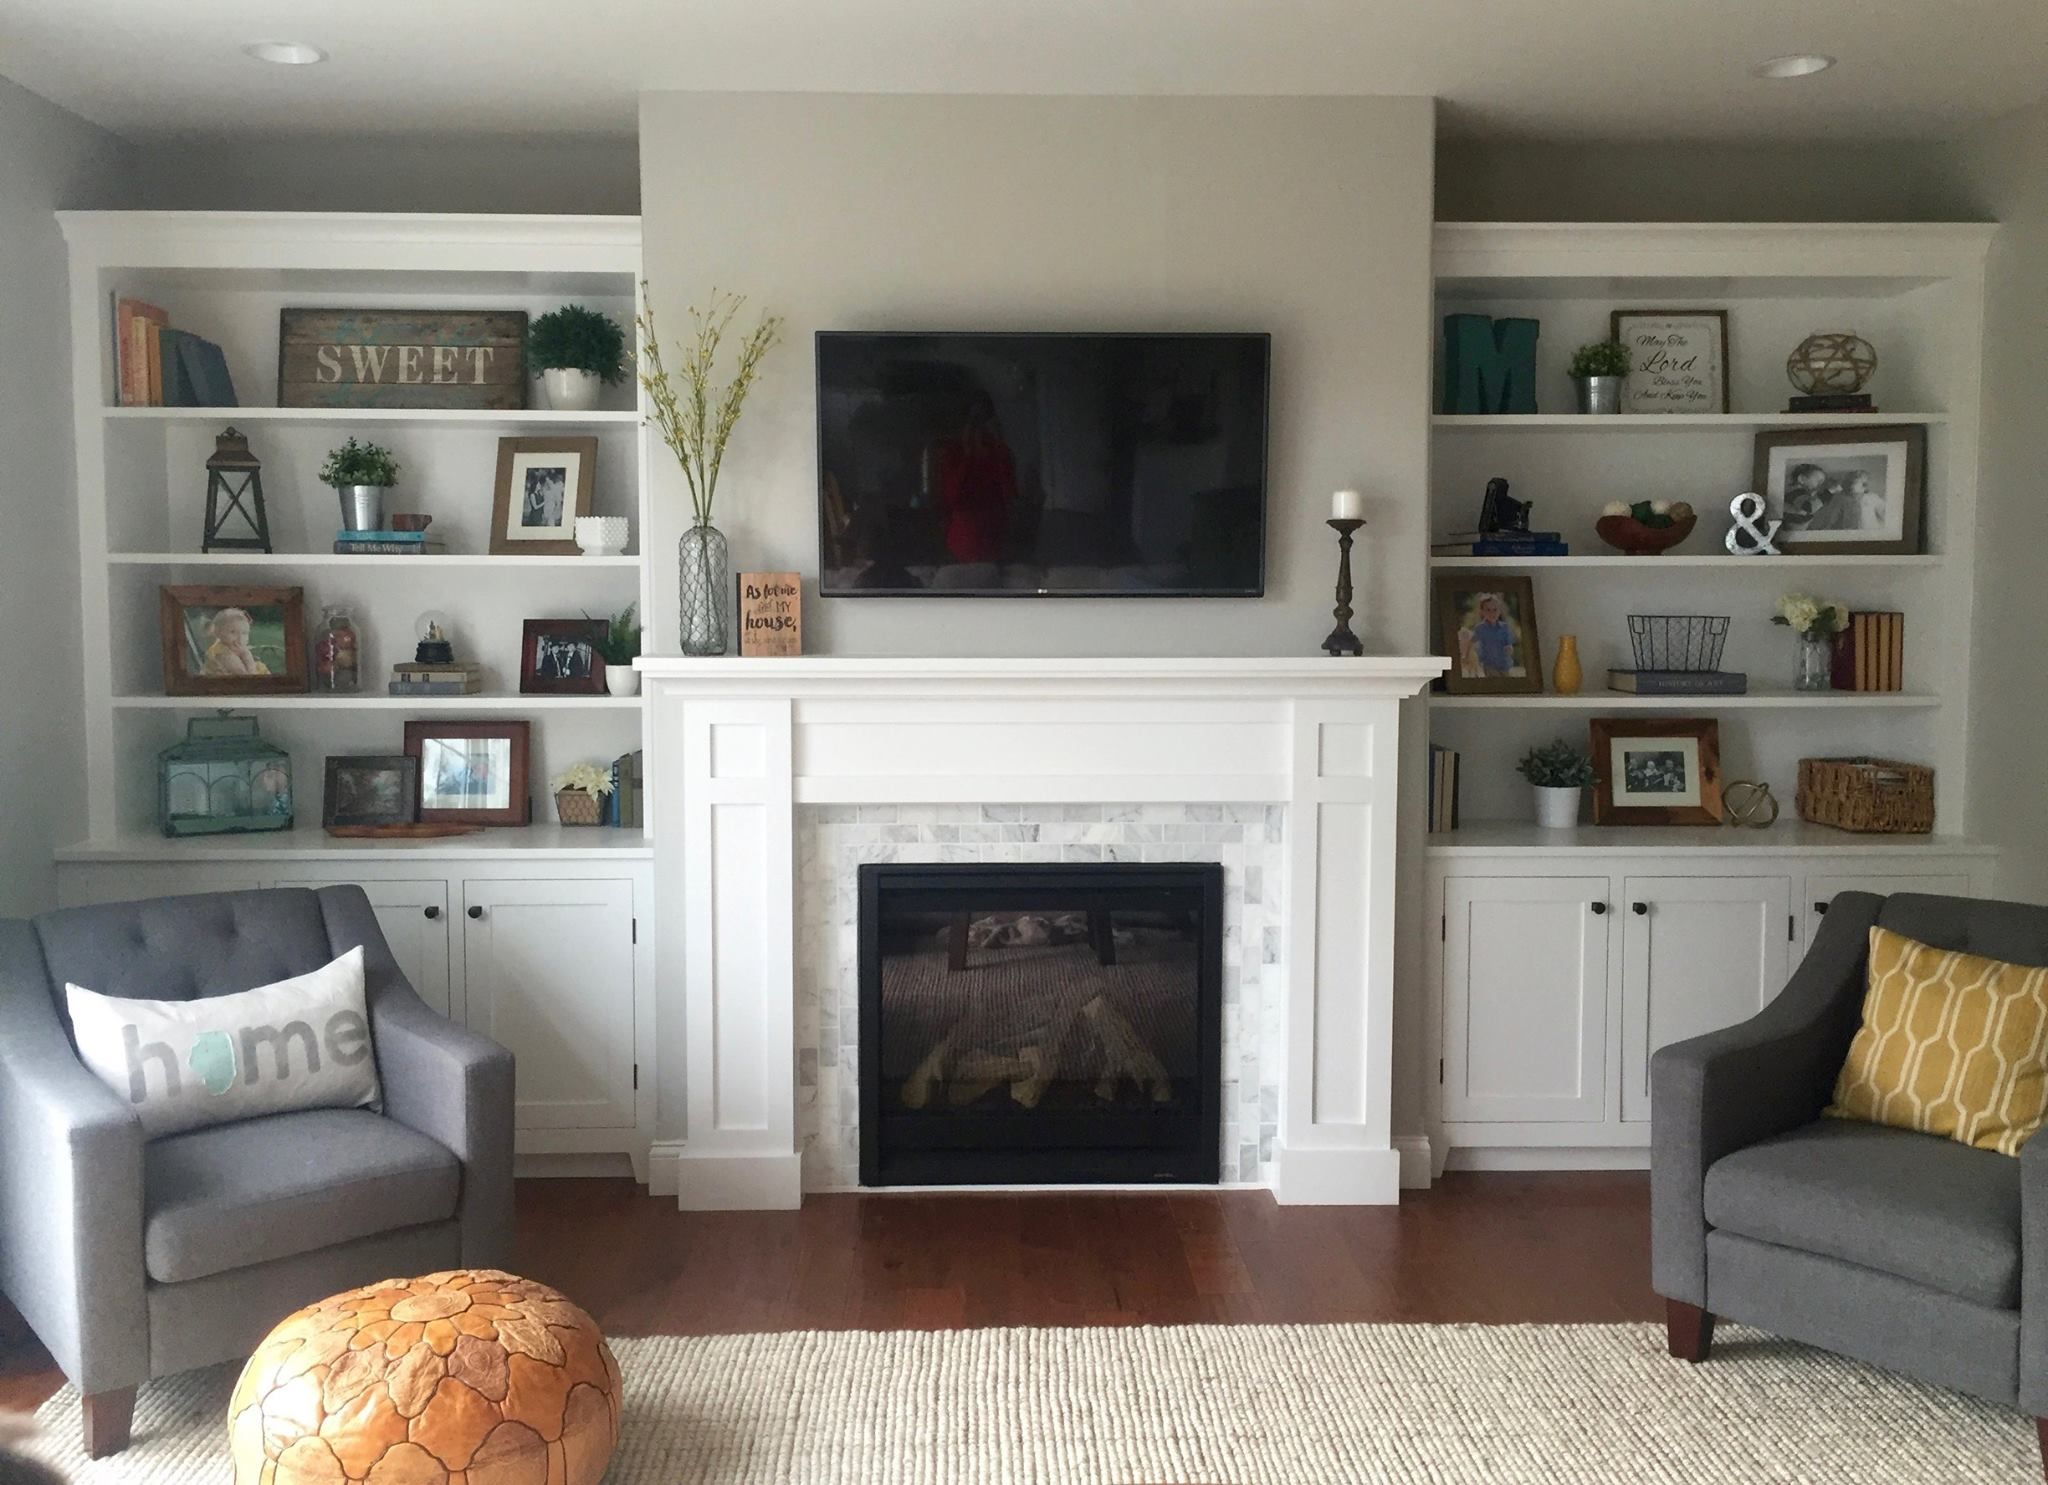 How to Build A Fireplace Mantel Shelf with Crown Molding New Instructions to Build This Fireplace Mantel with Built In